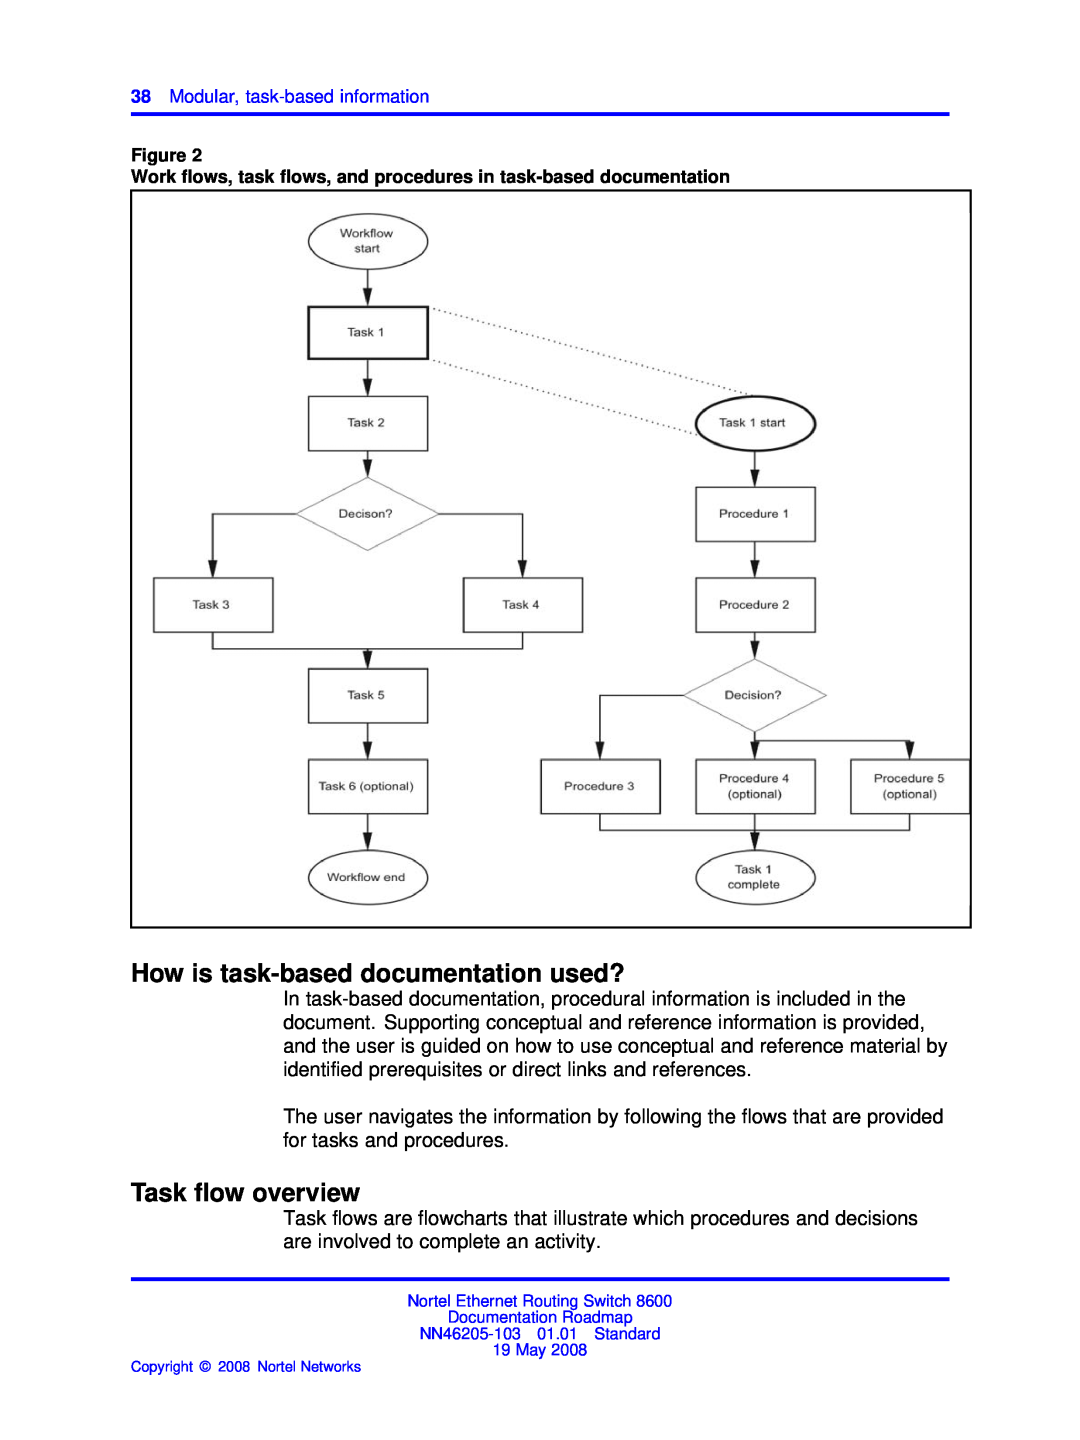 Nortel Networks 8600 manual How is task-based documentation used?, Task ﬂow overview 